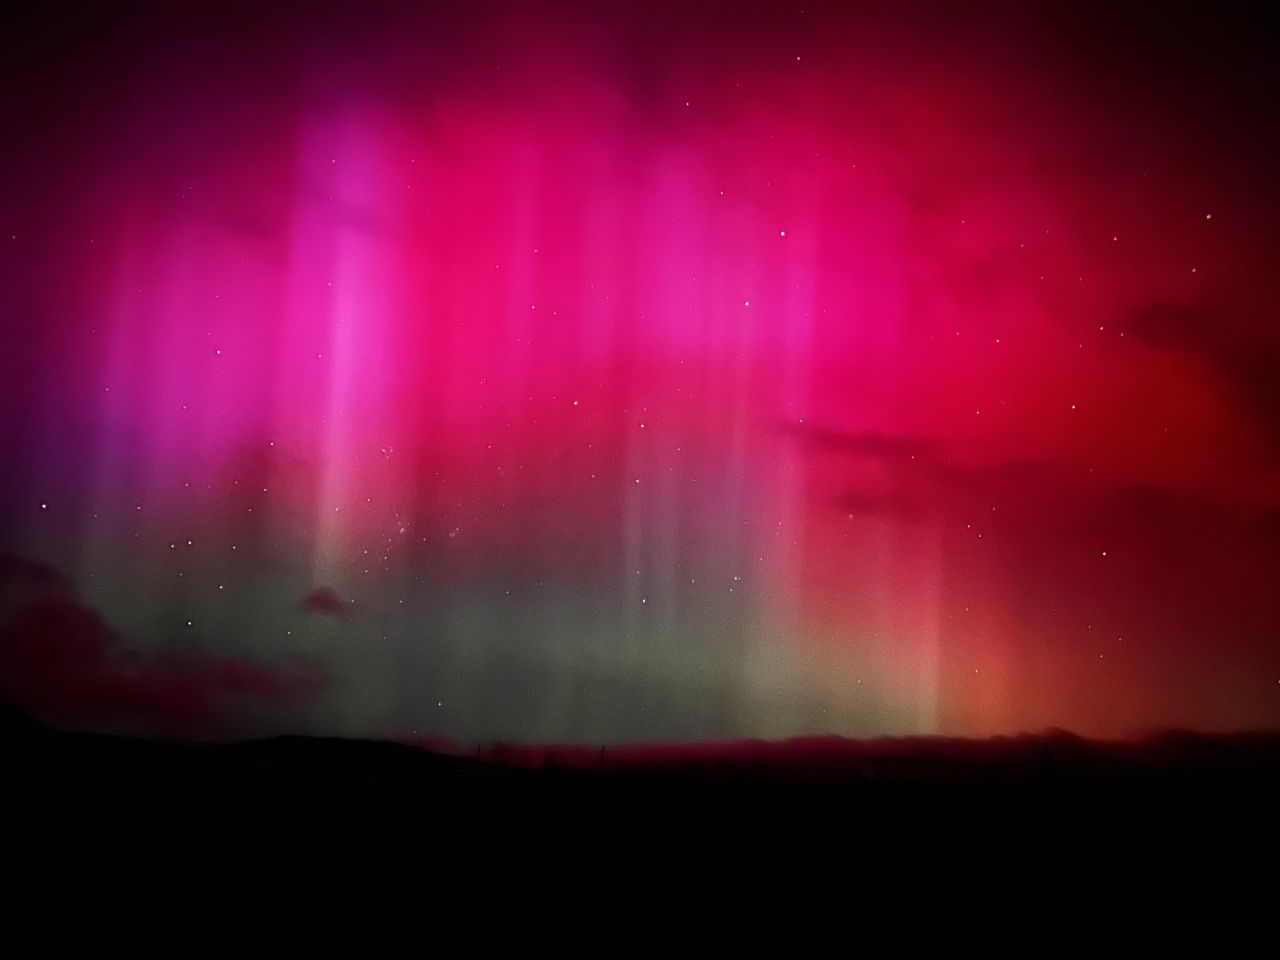 The aurora australis as seen in Central Otago in New Zealand around 6:20 am NZT, on May 11.